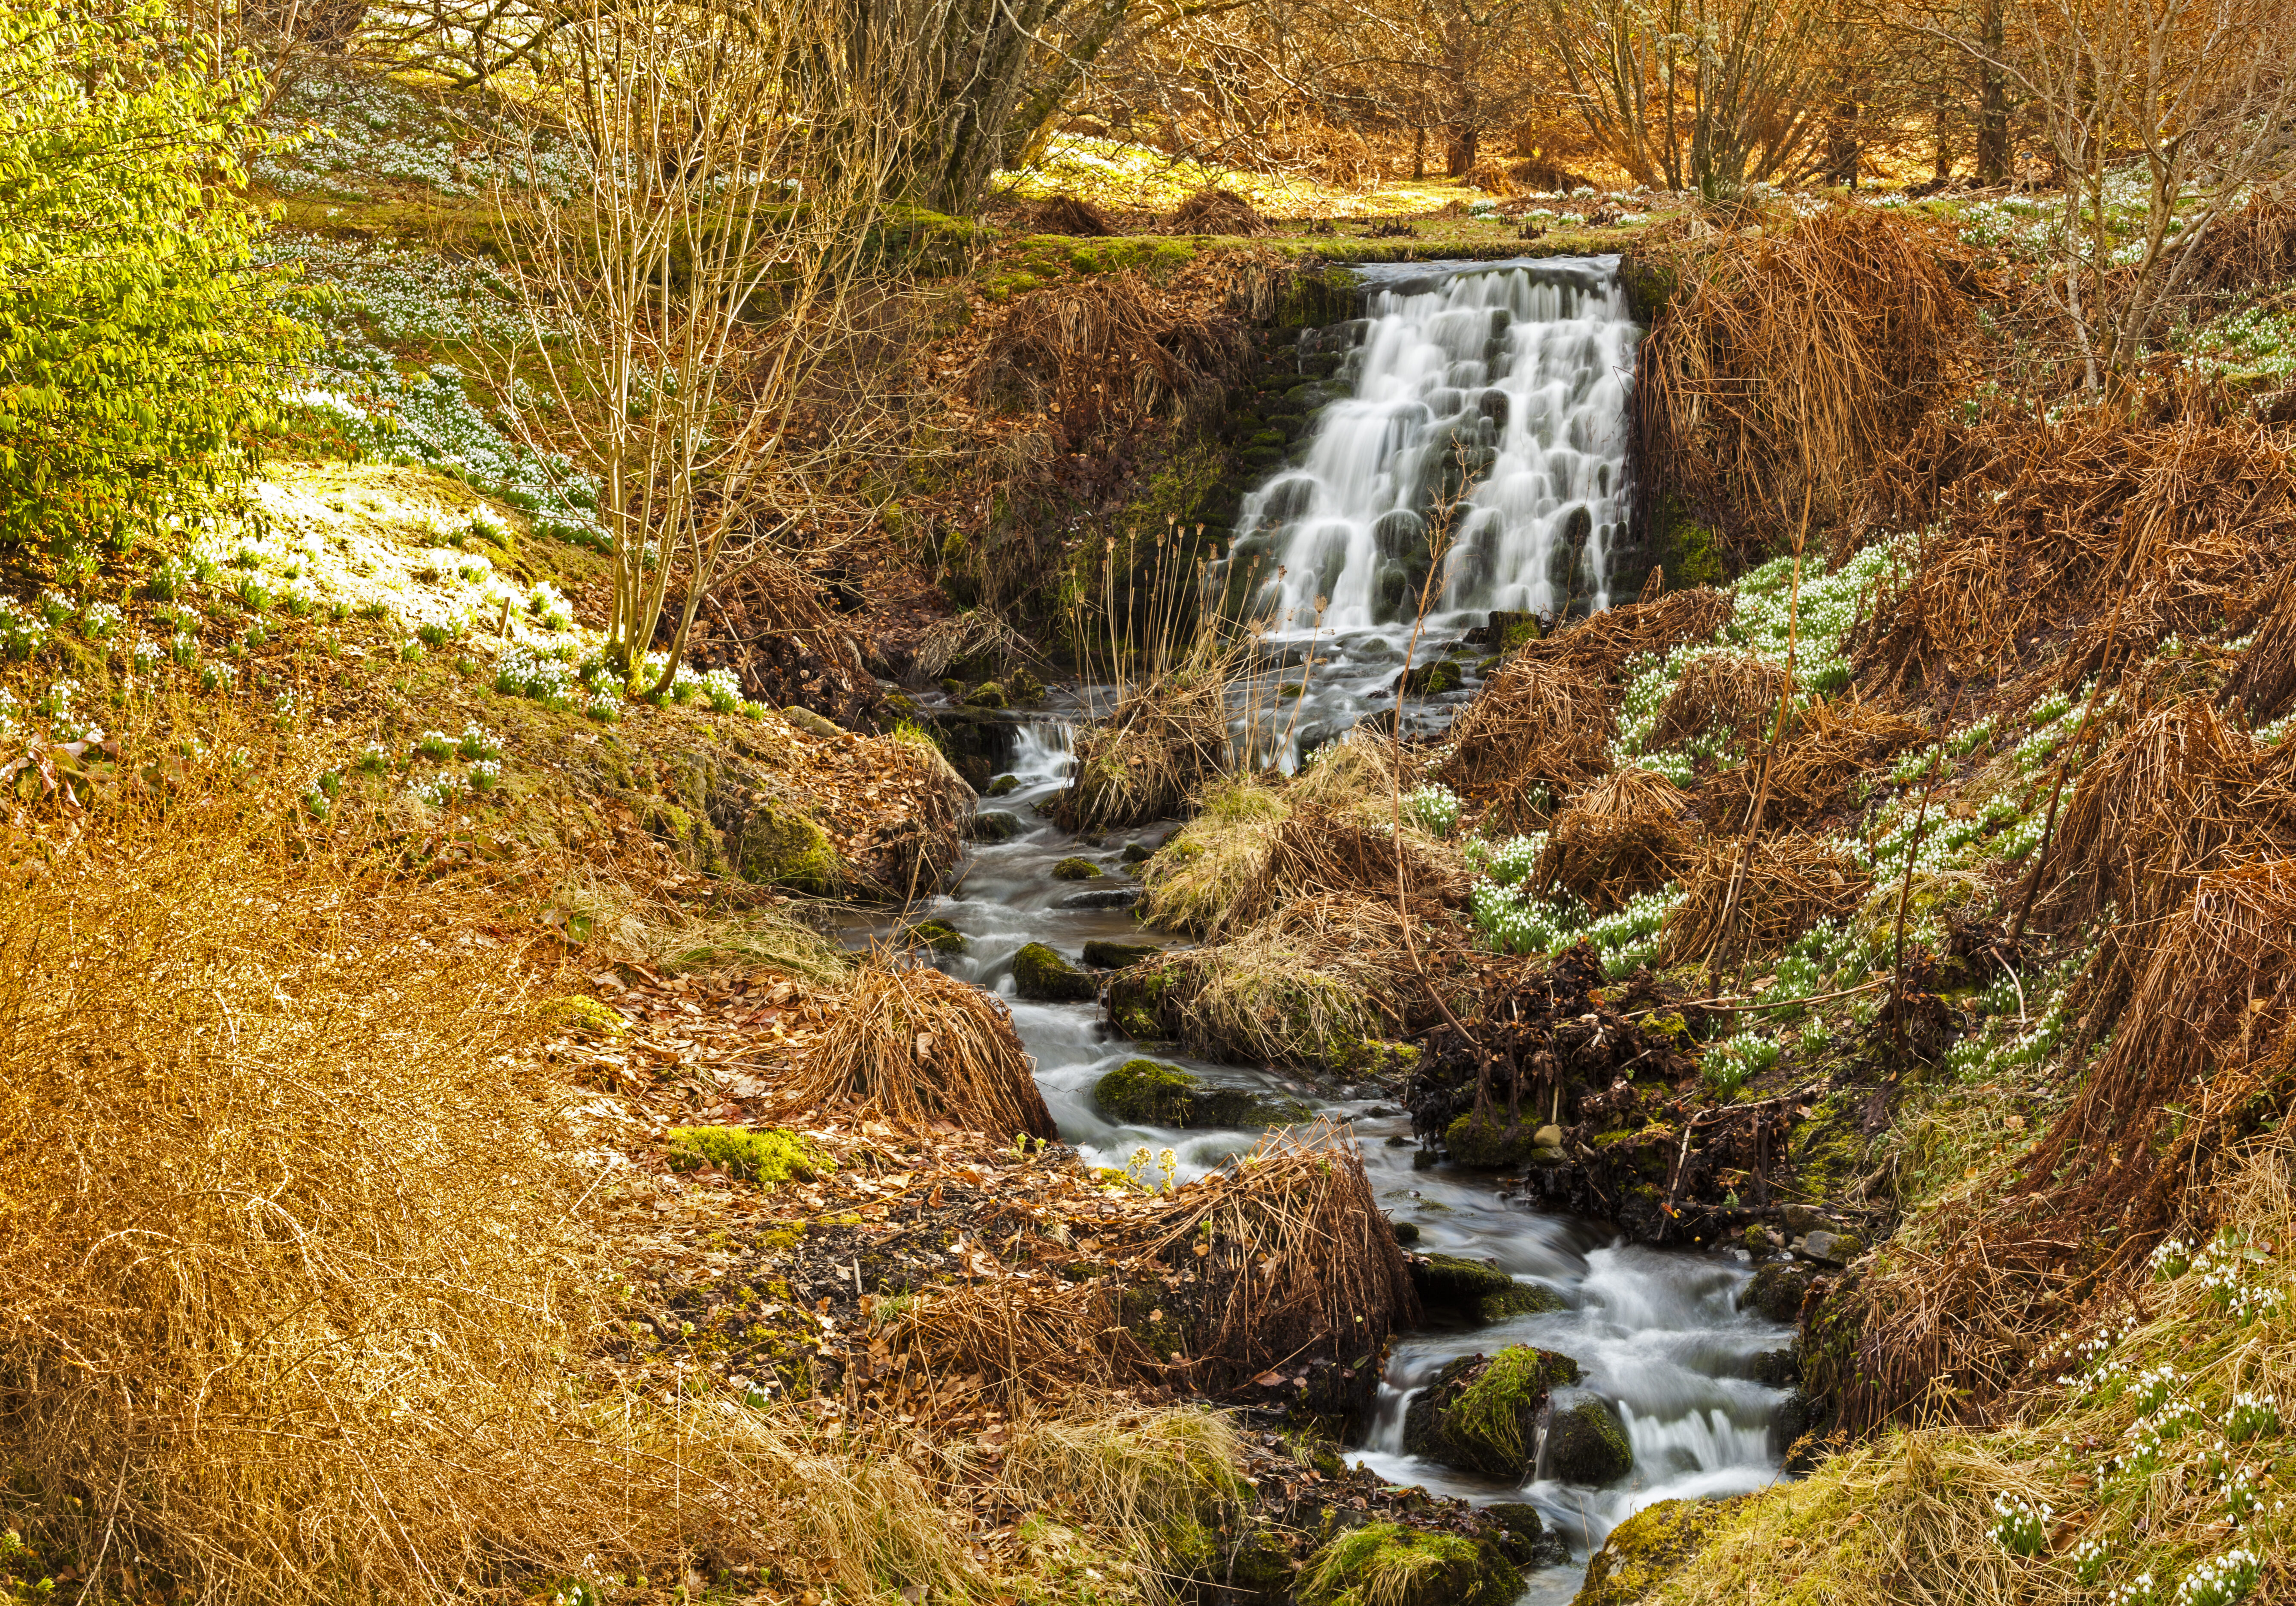 A waterfall and snowdrops at Dawyck botanic garden